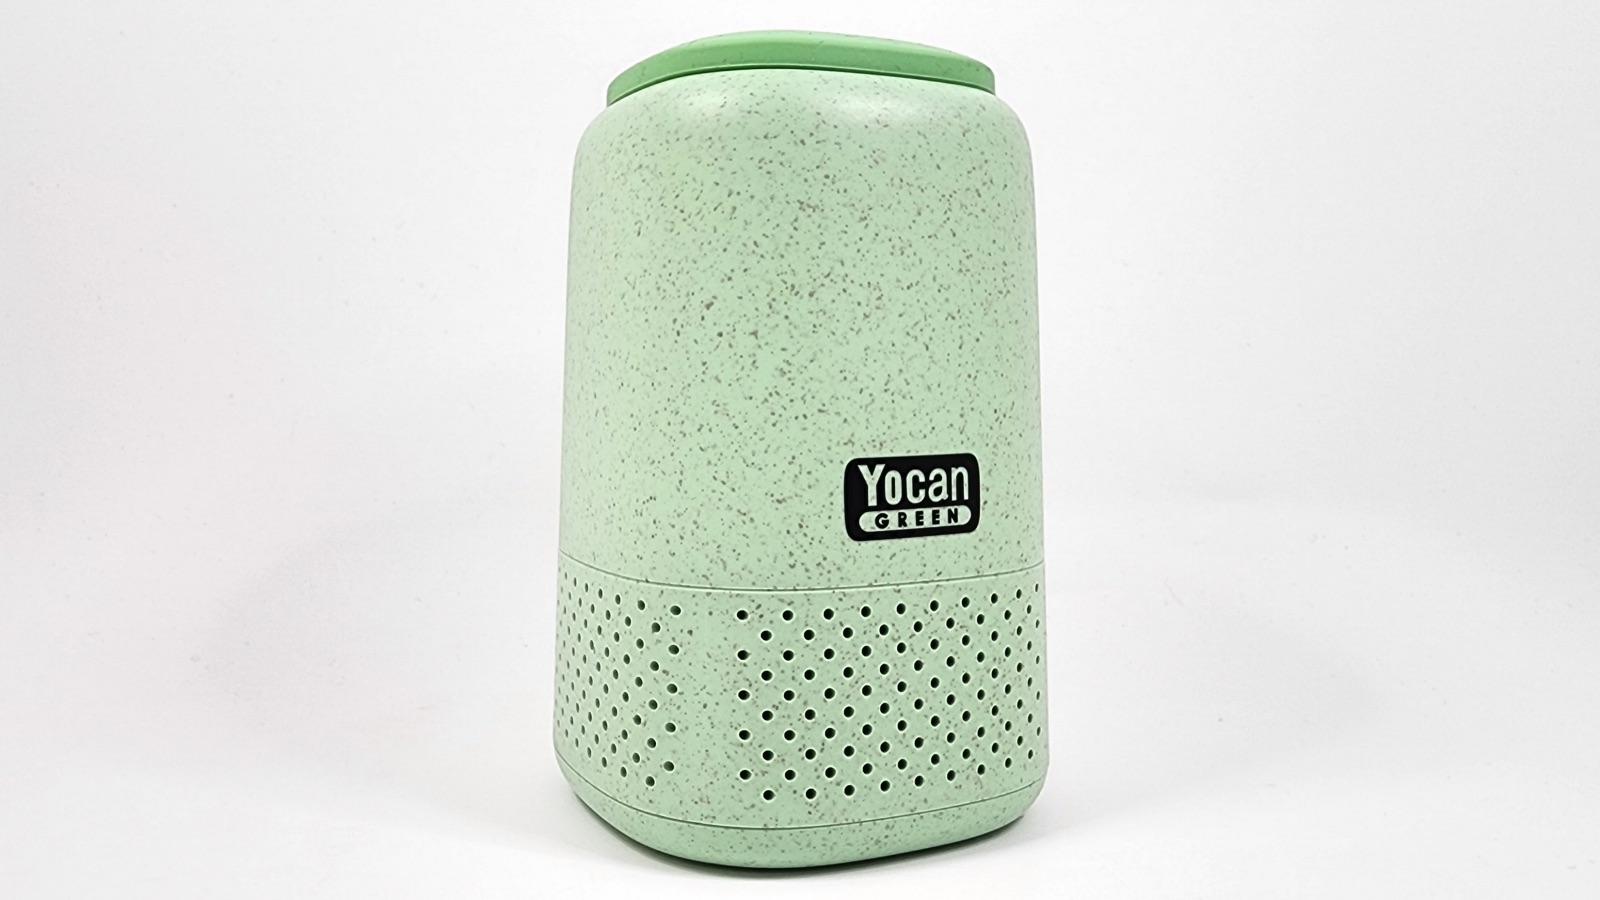 Yocan Invisibility Cloak portable air filter device for vaping and smoke